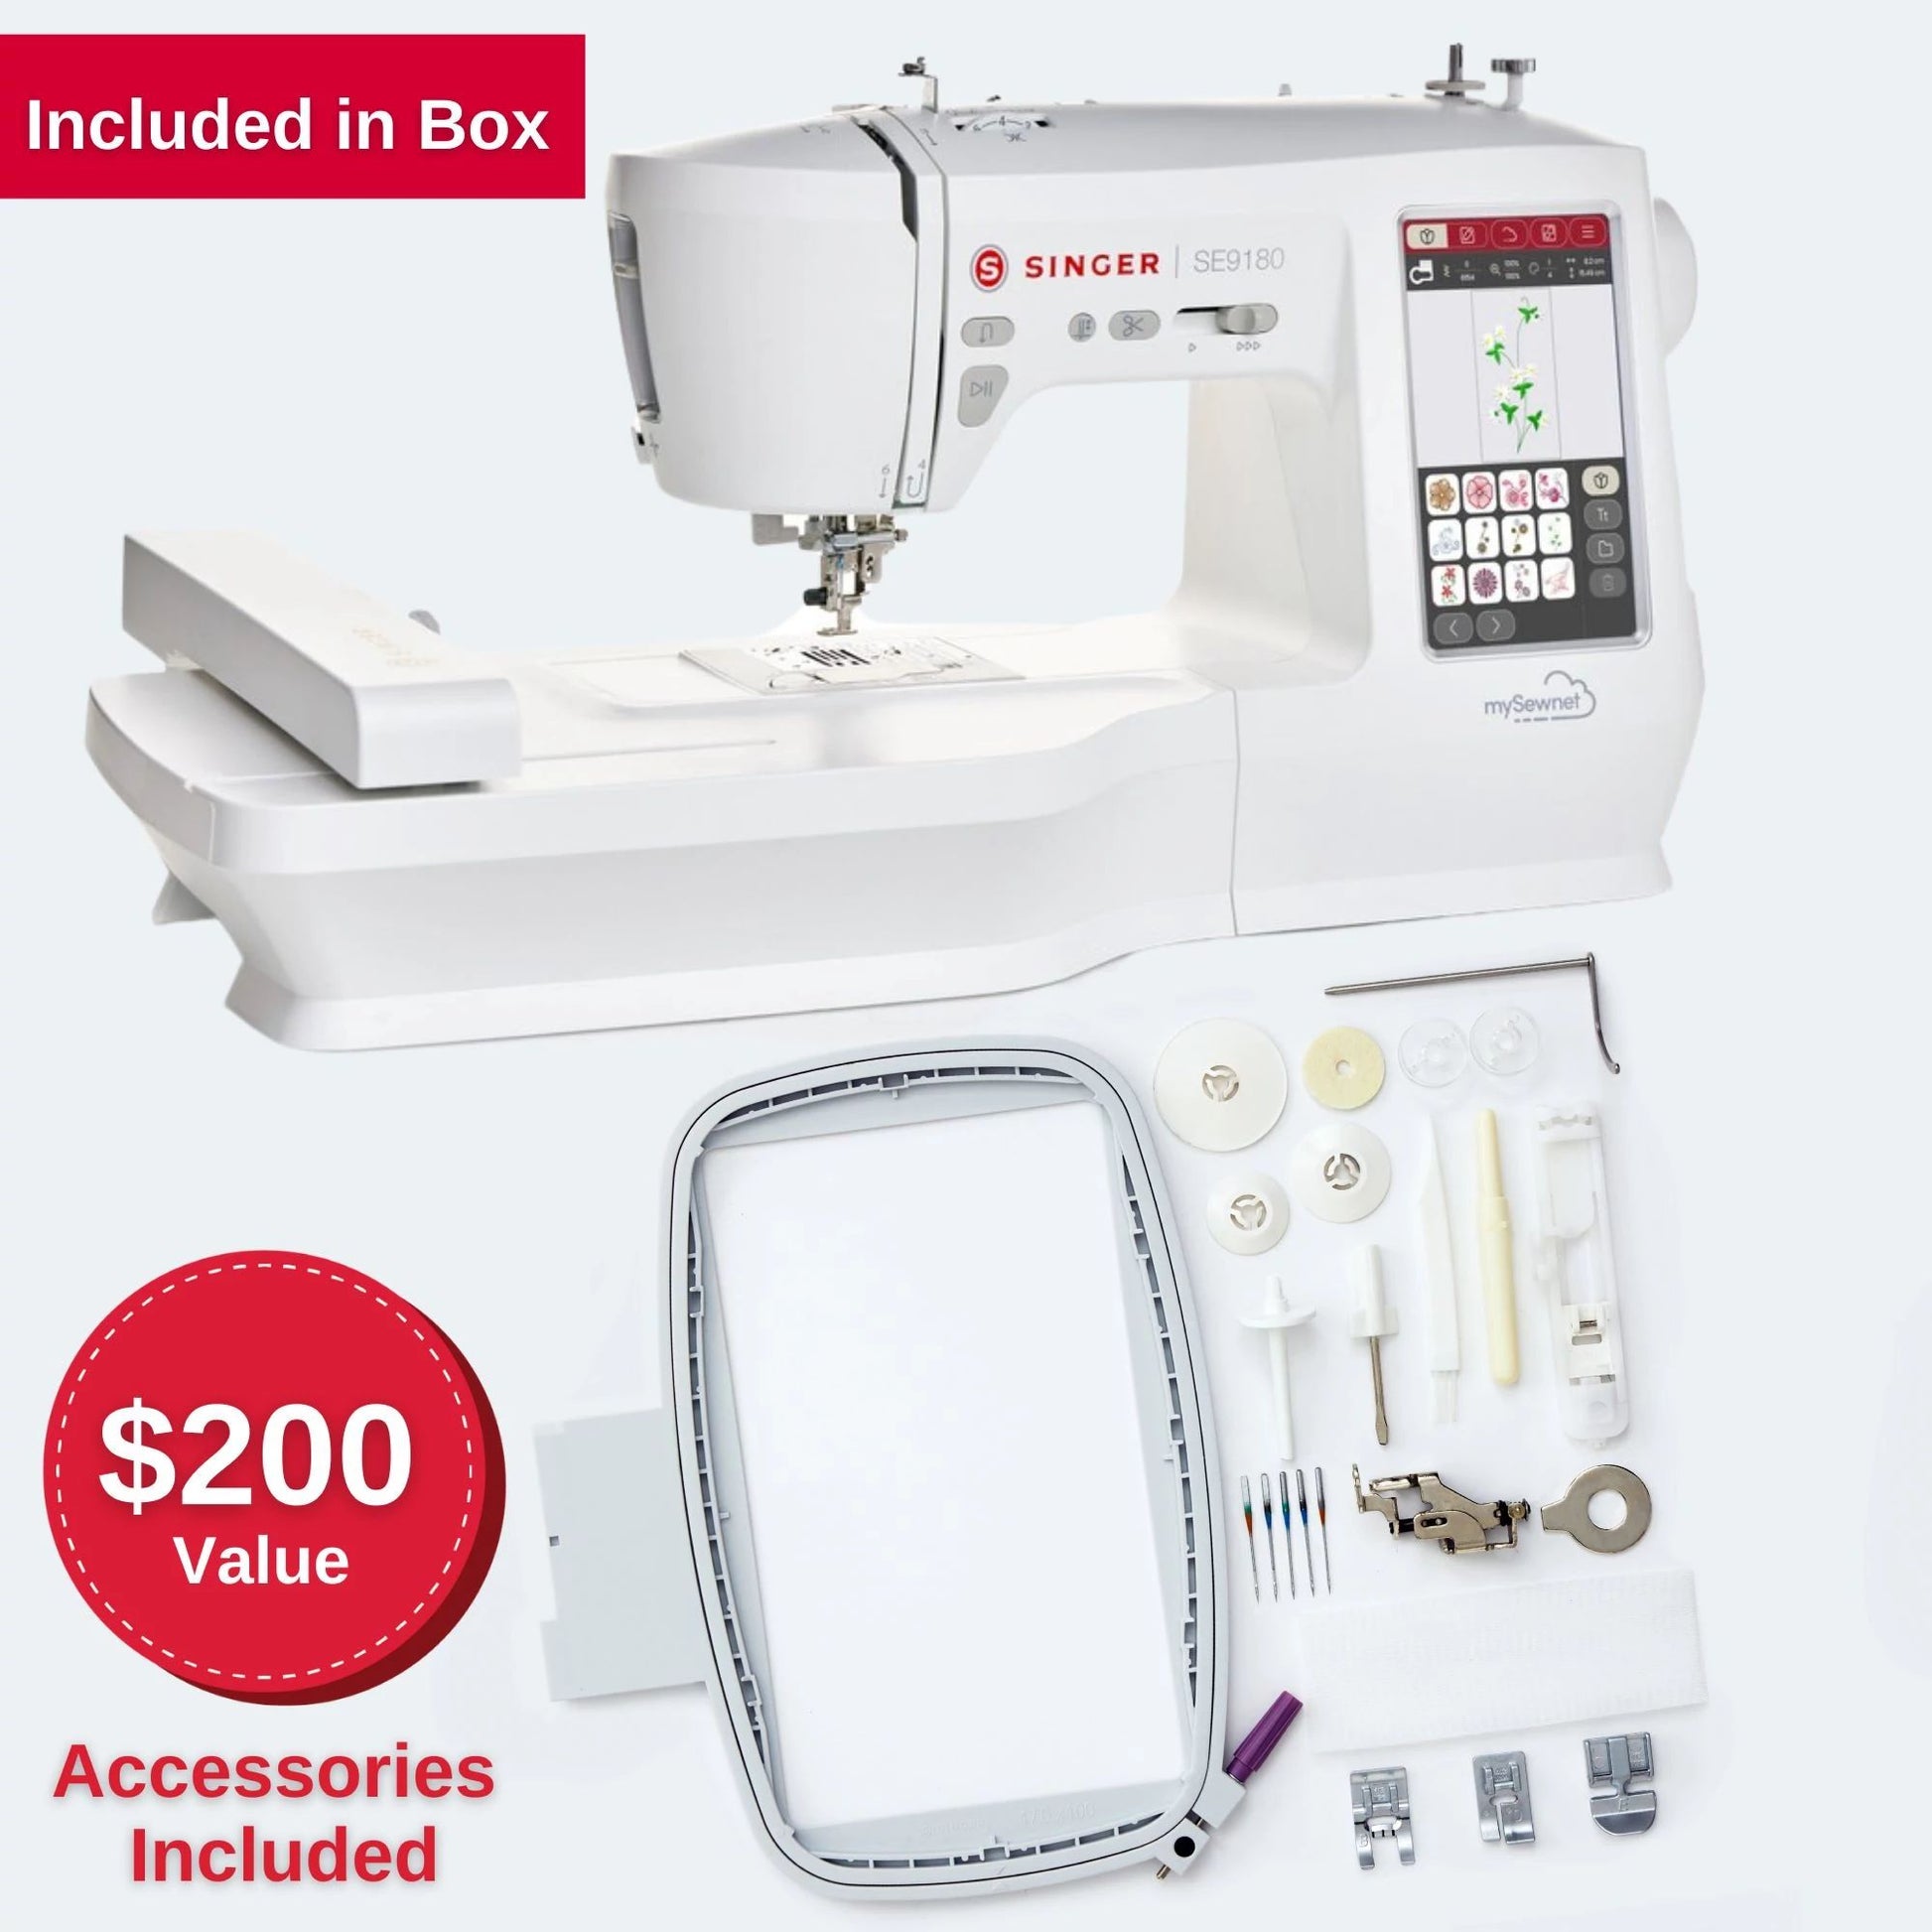 Sewing Accessories Image & Photo (Free Trial)